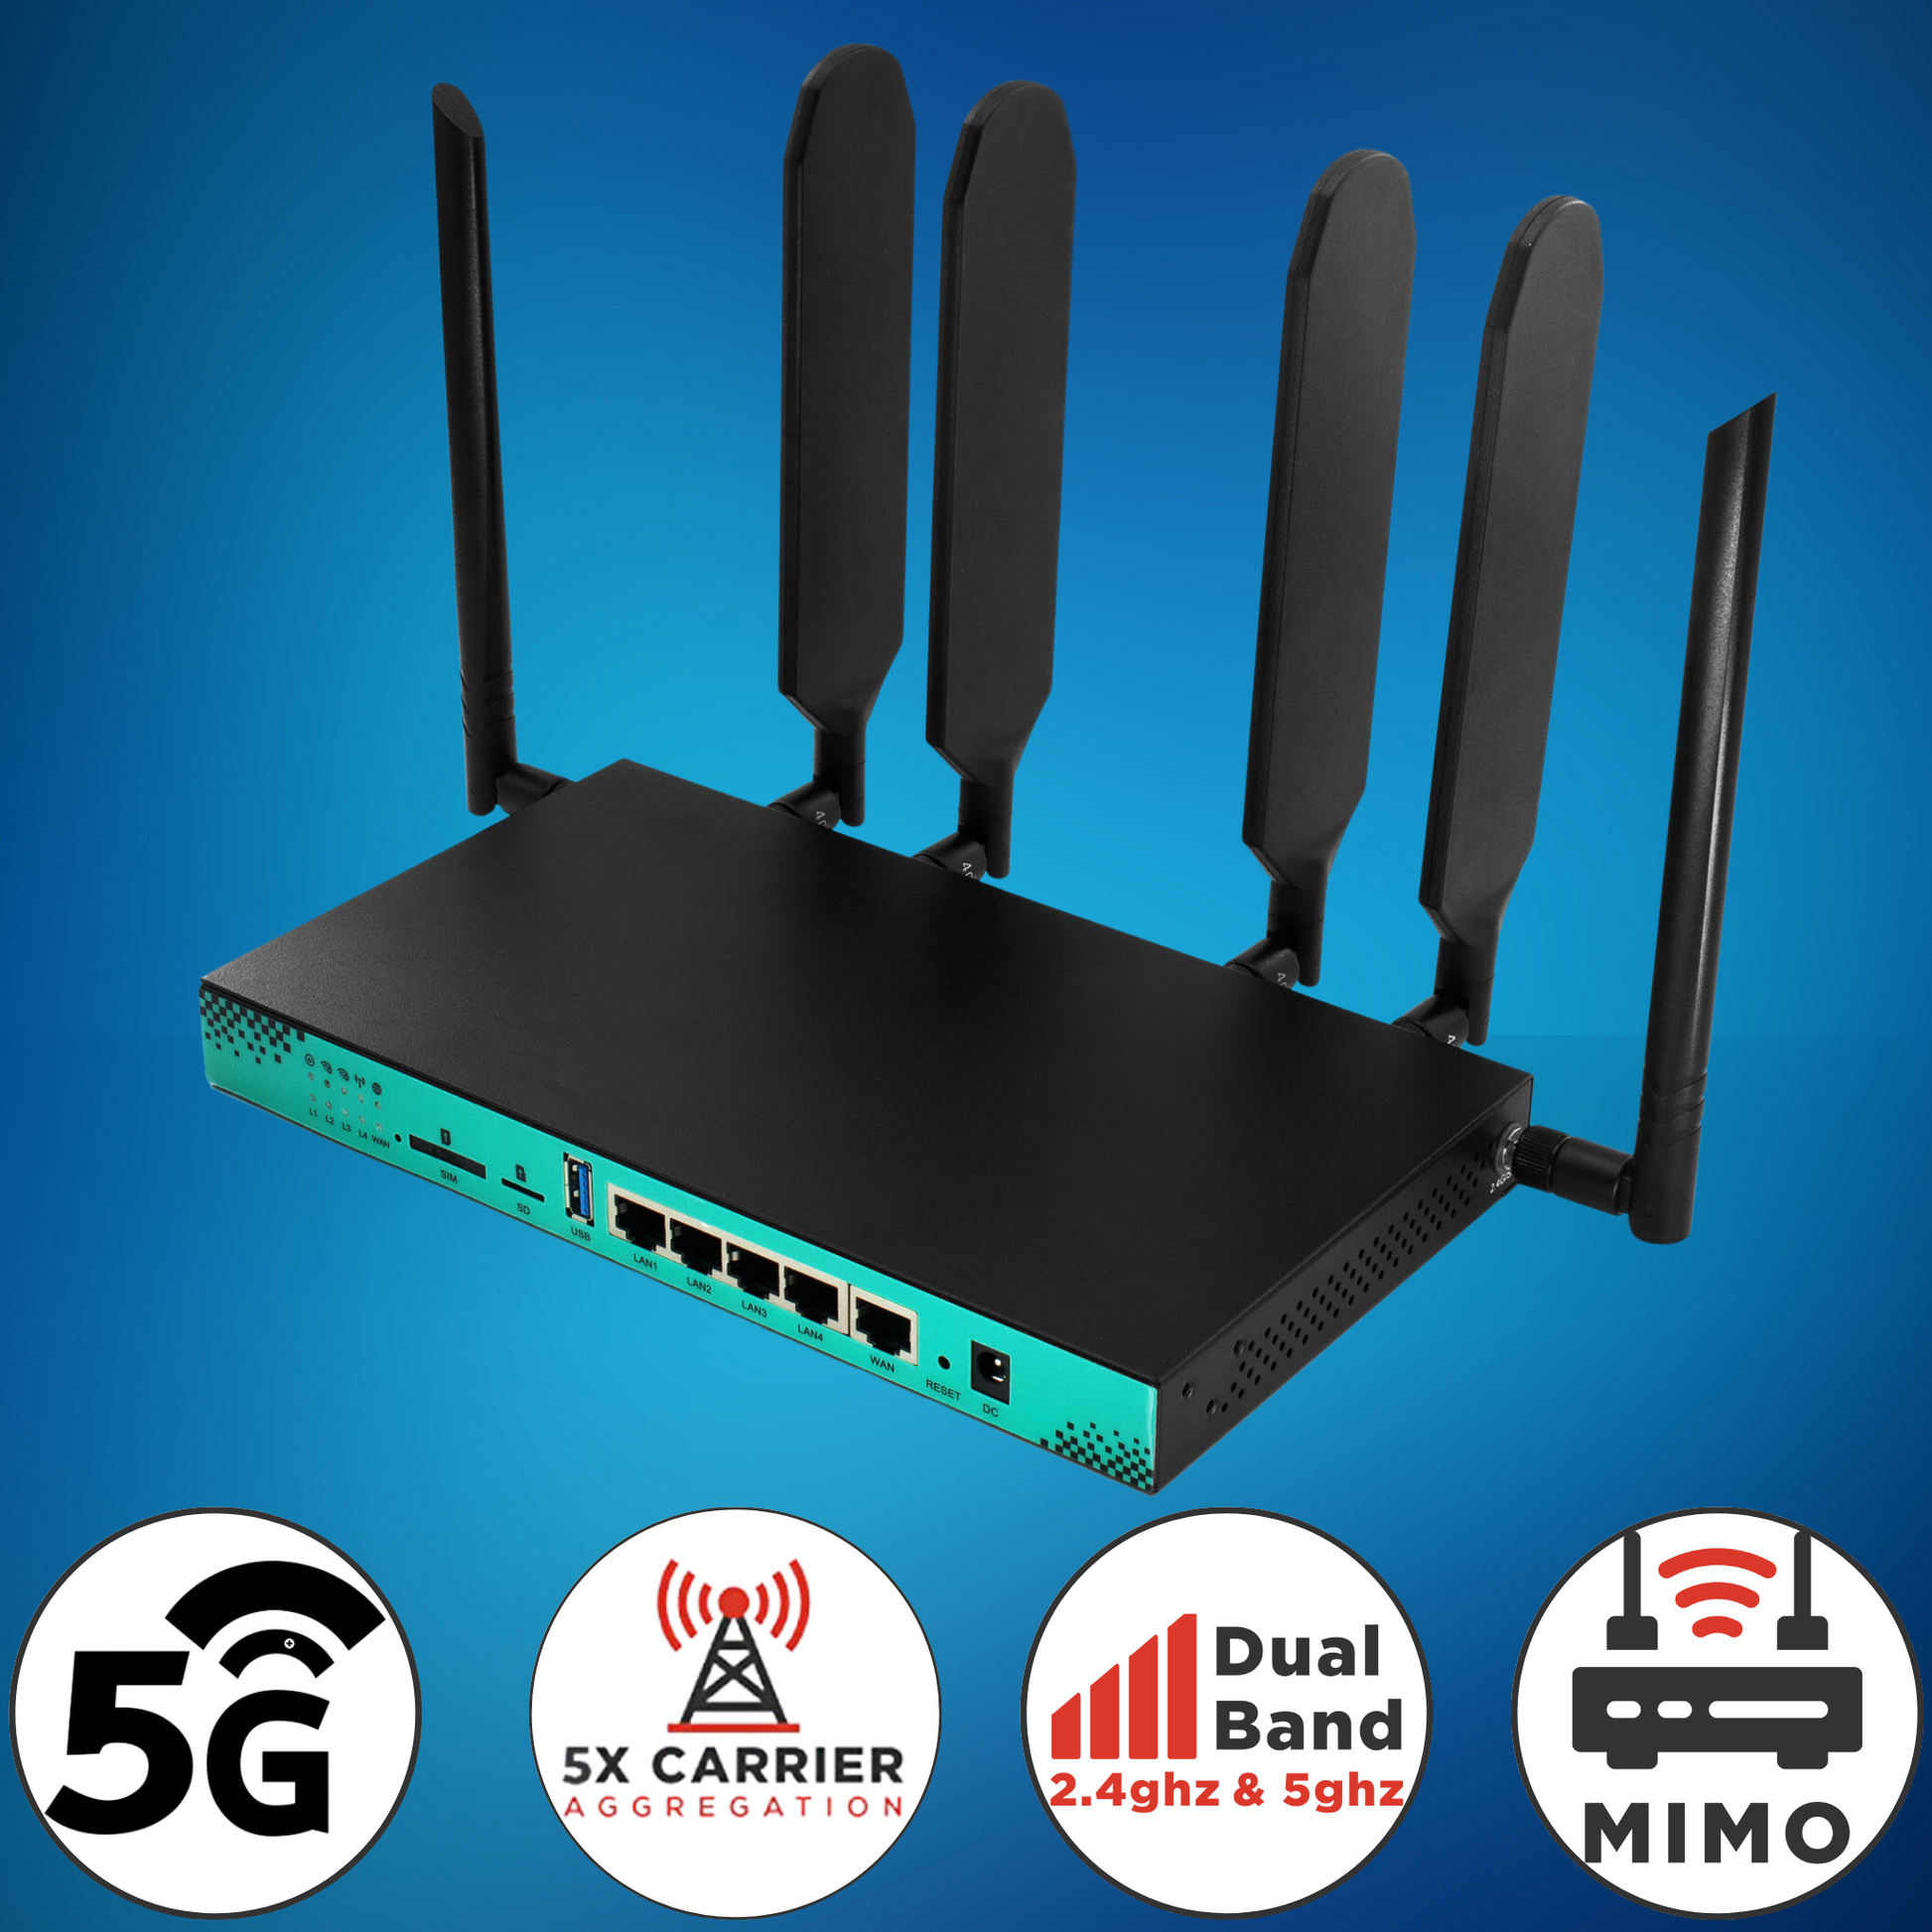 Possibly the BEST 5G Sim LTE Router I Have EVER Used - The